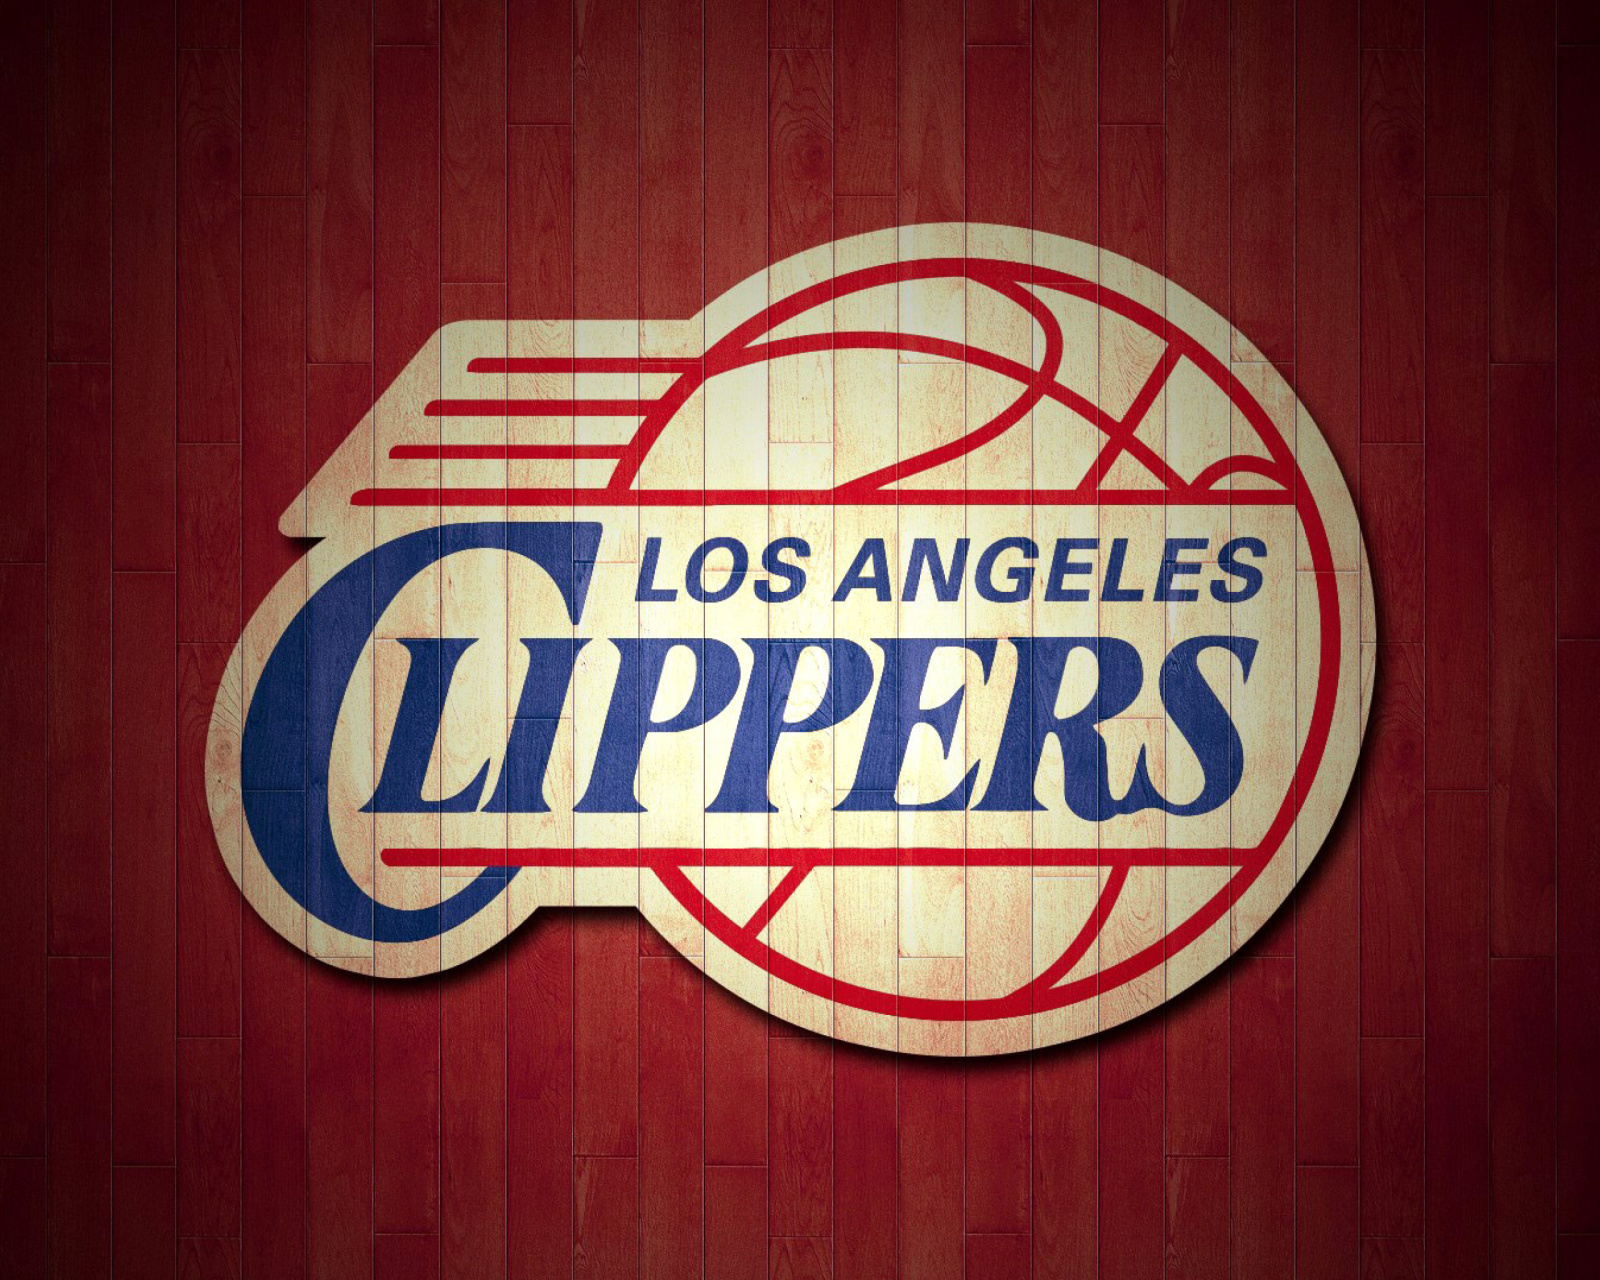 Los Angeles Clippers Logo wallpaper 1600x1280